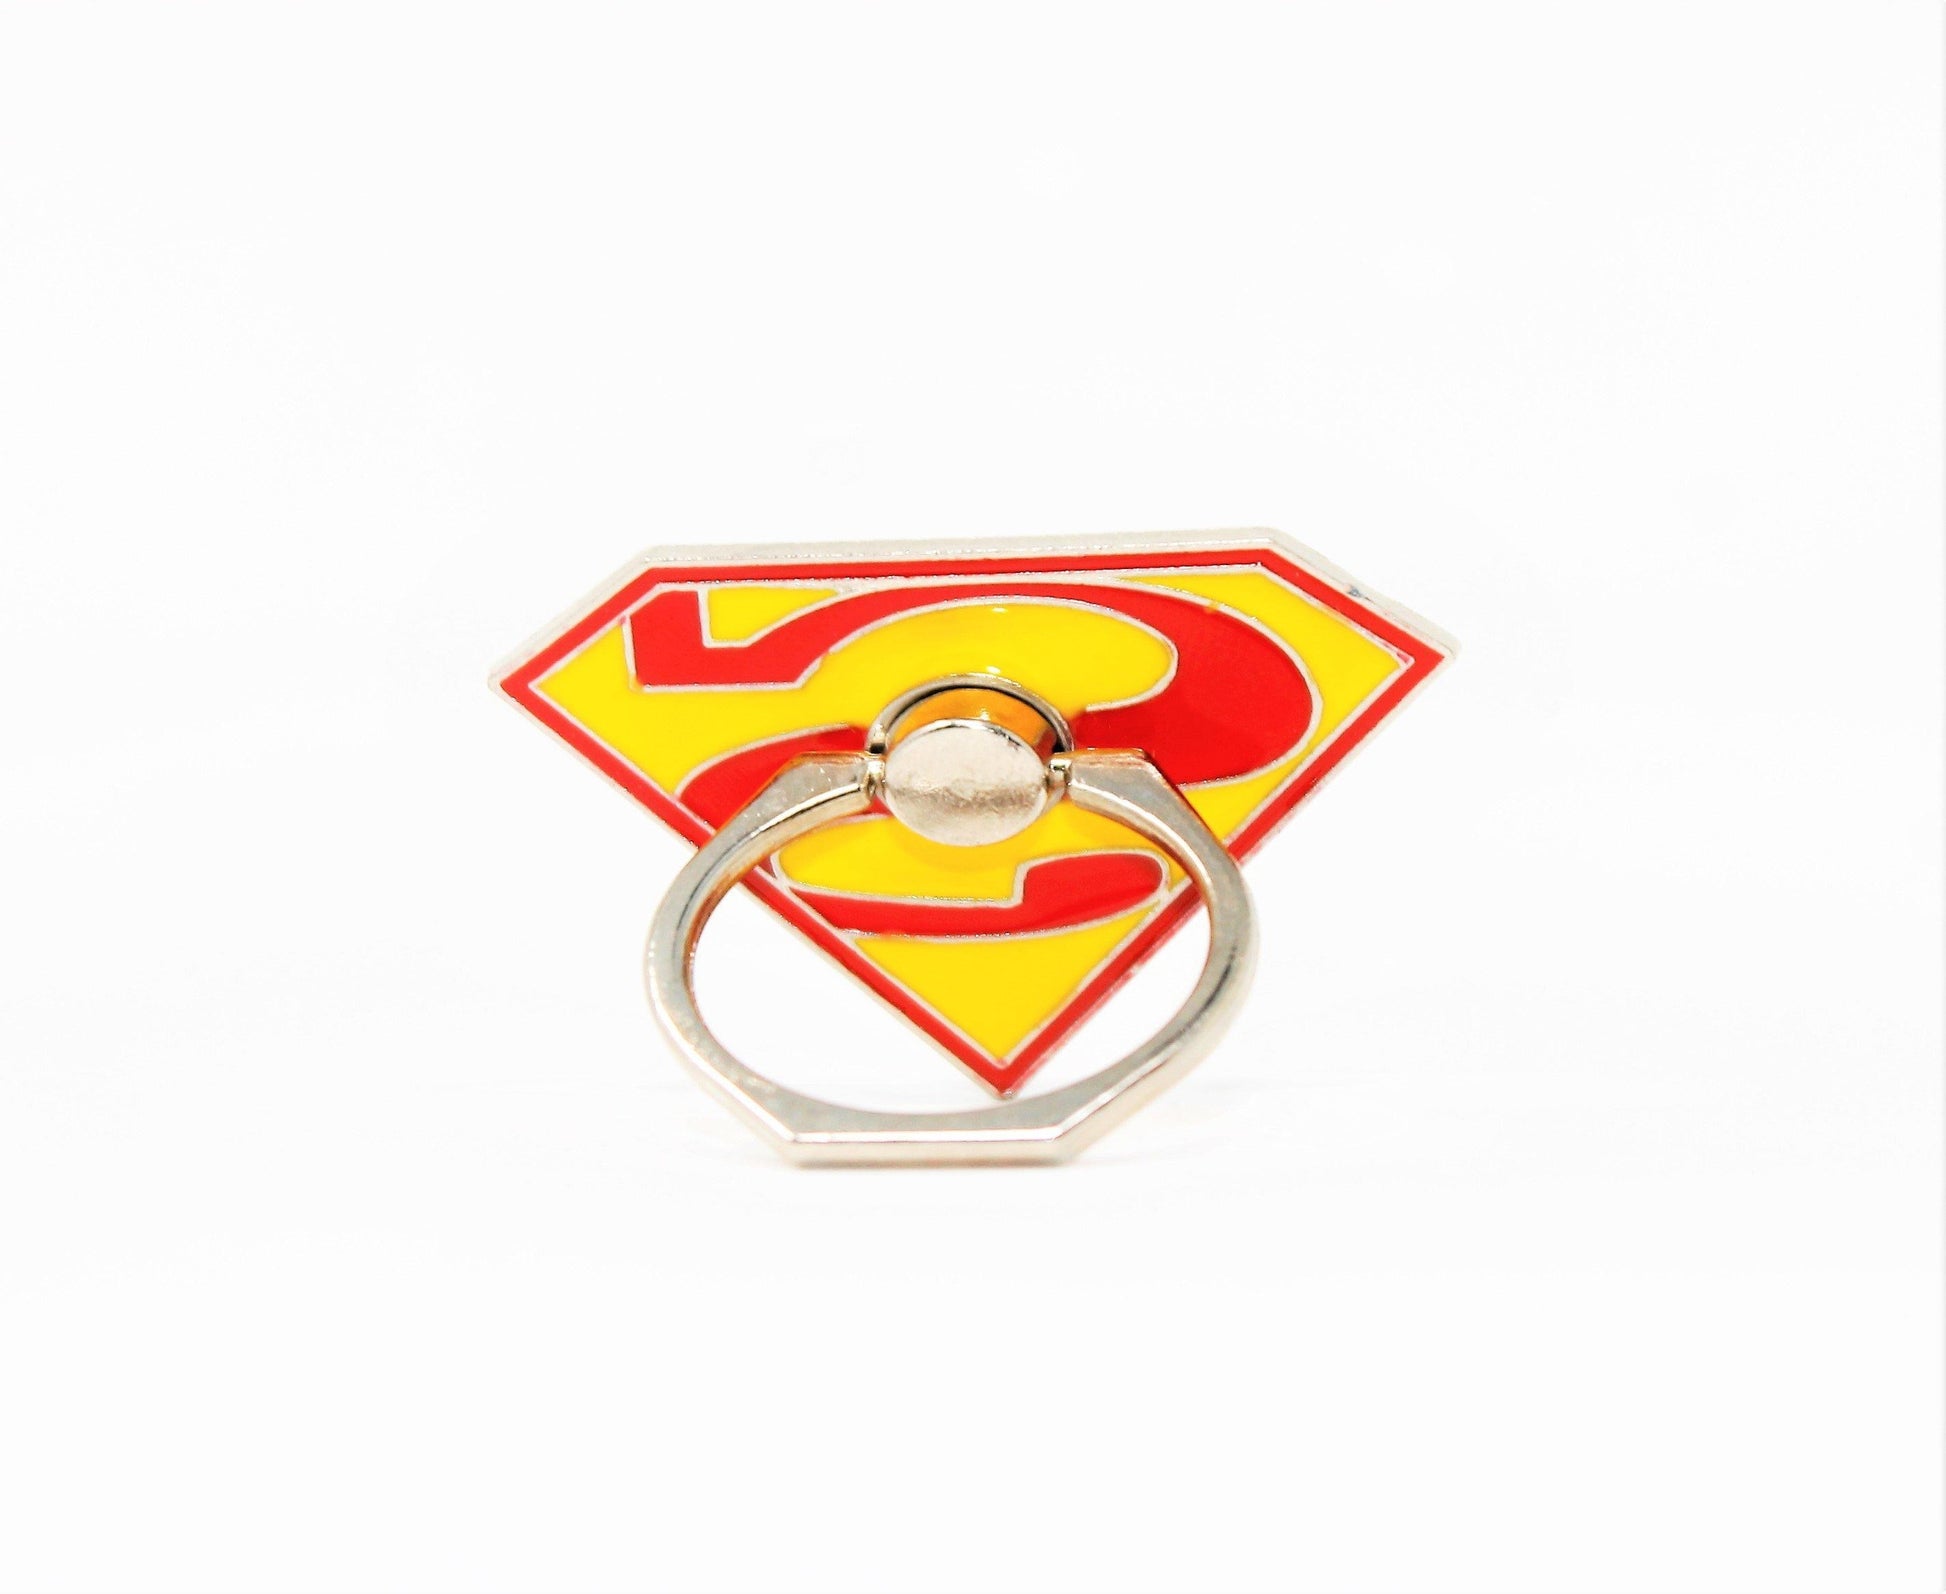 Indian Petals SuperMan Multi purpose Metal Mobile Holder Ring Stand for Mobile Phones and Tablets - Indian Petals